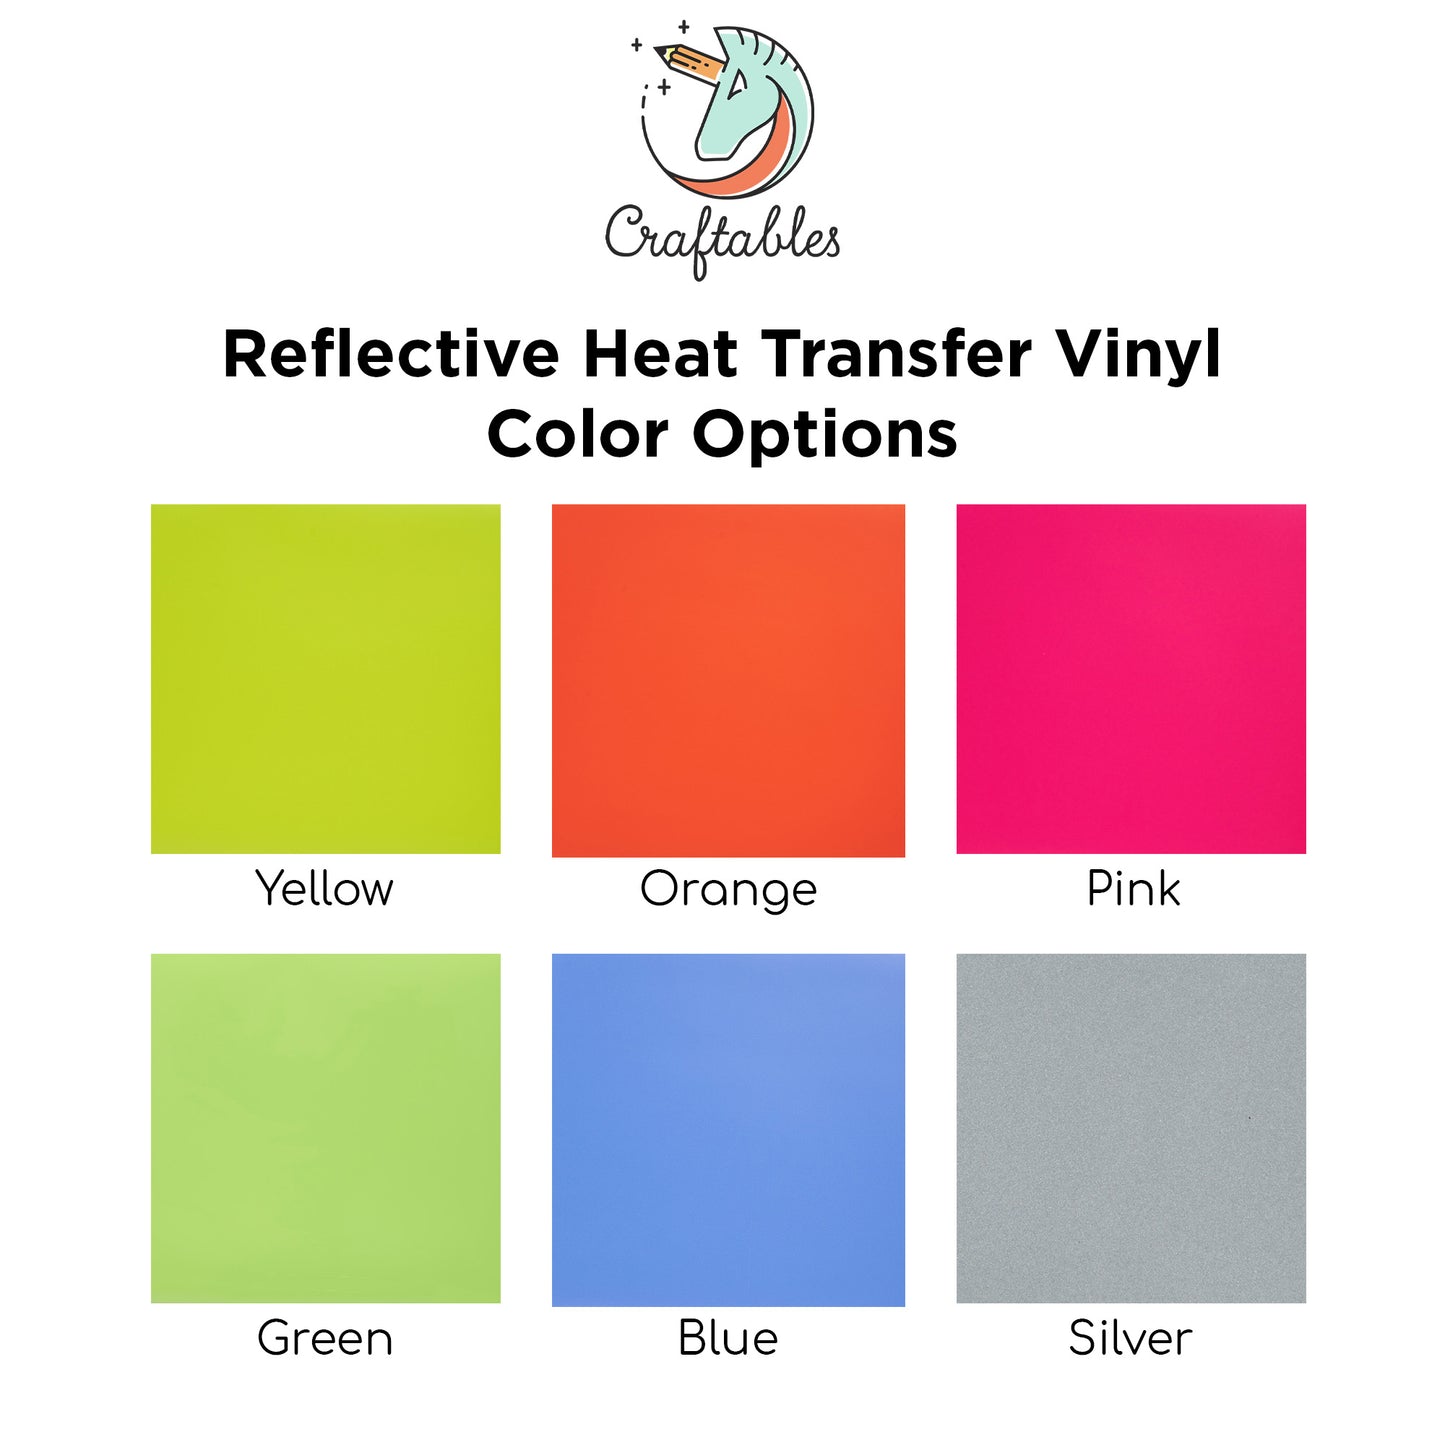 Silver Reflective Reflective Heat Transfer Vinyl Sheets By Craftables